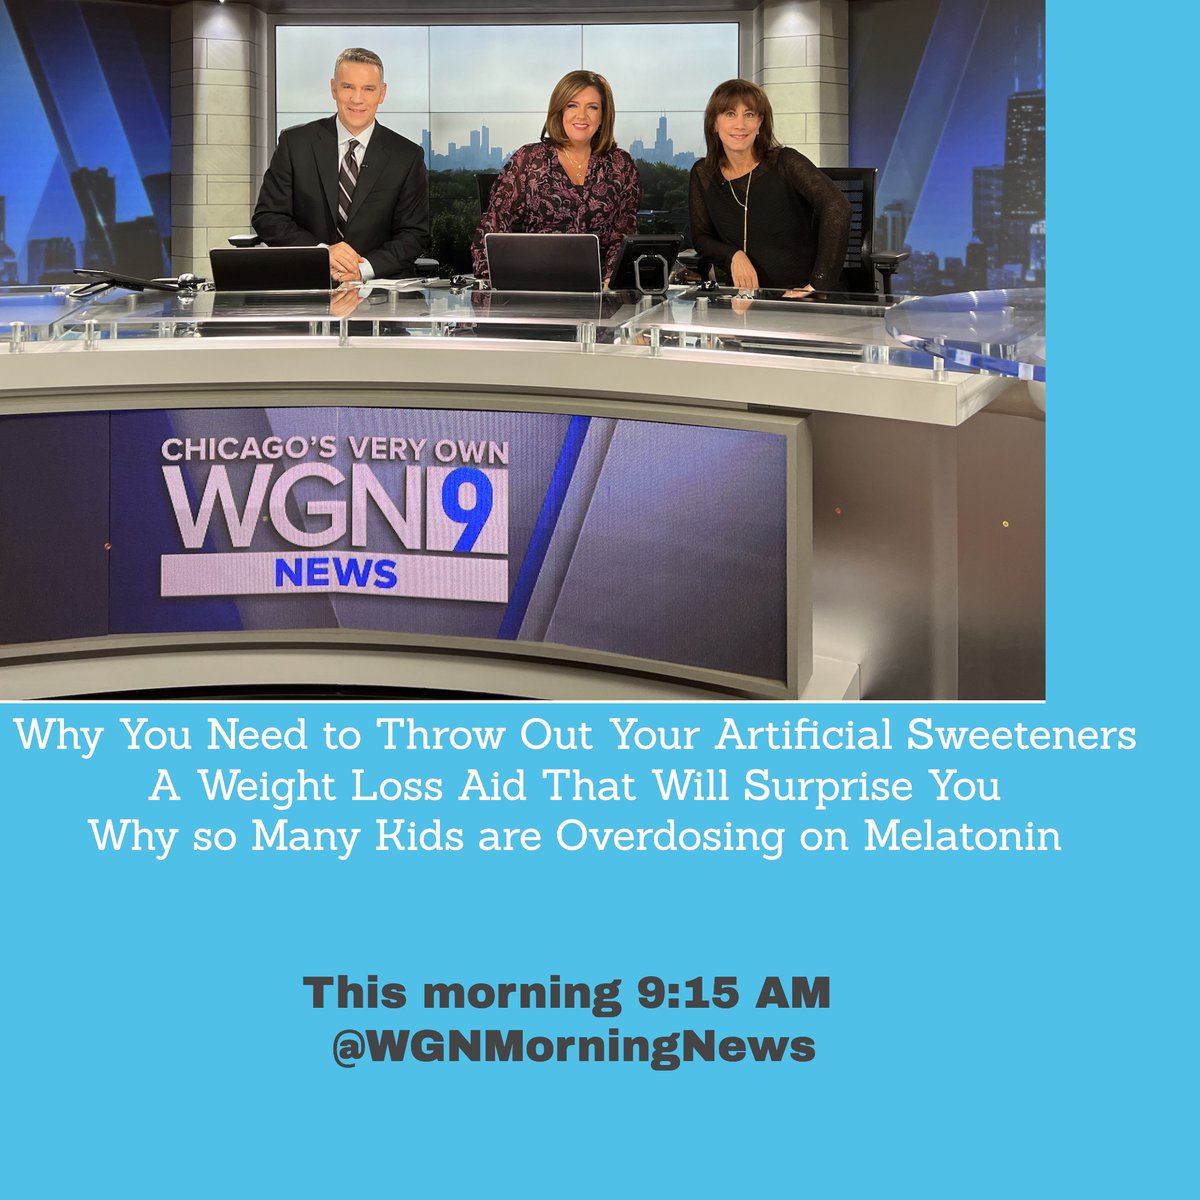 This morning @WGNMorningNews, I explain WHY the World Health Organization has said to stop using artificial sweeteners. A new study out of Japan helped dieters lose 18 pounds in 3 months! And why you need to hide the melatonin gummies if you have kids.